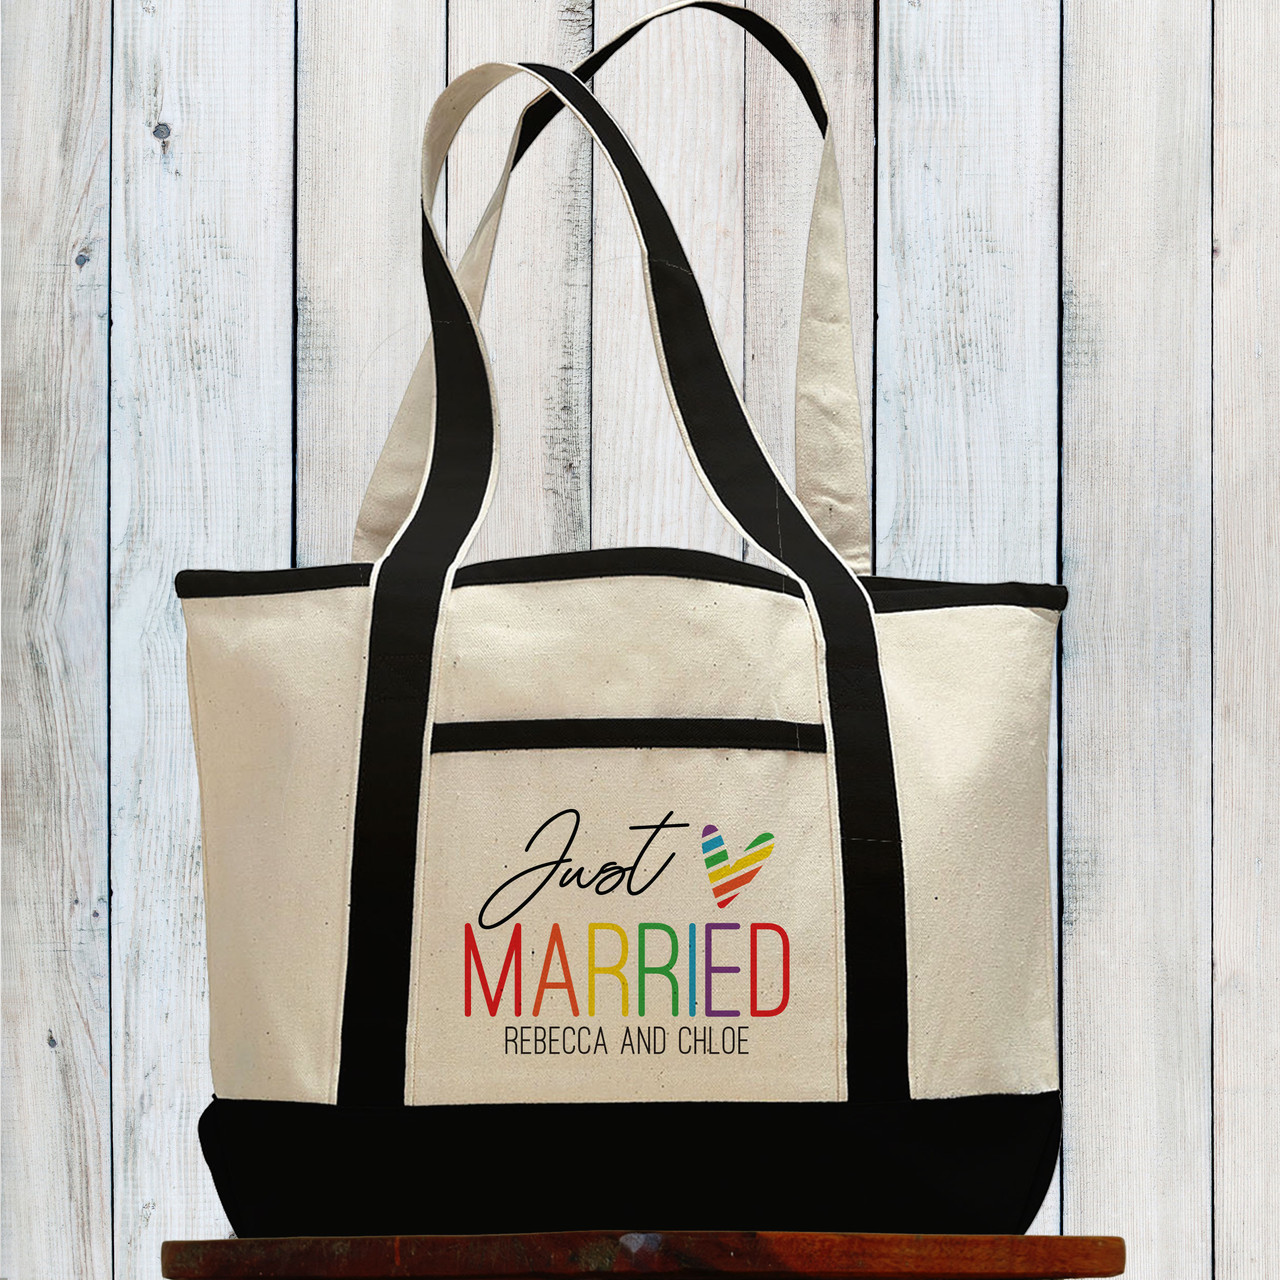 Just Married Personalized Beach Tote Bag for Same Sex Couple